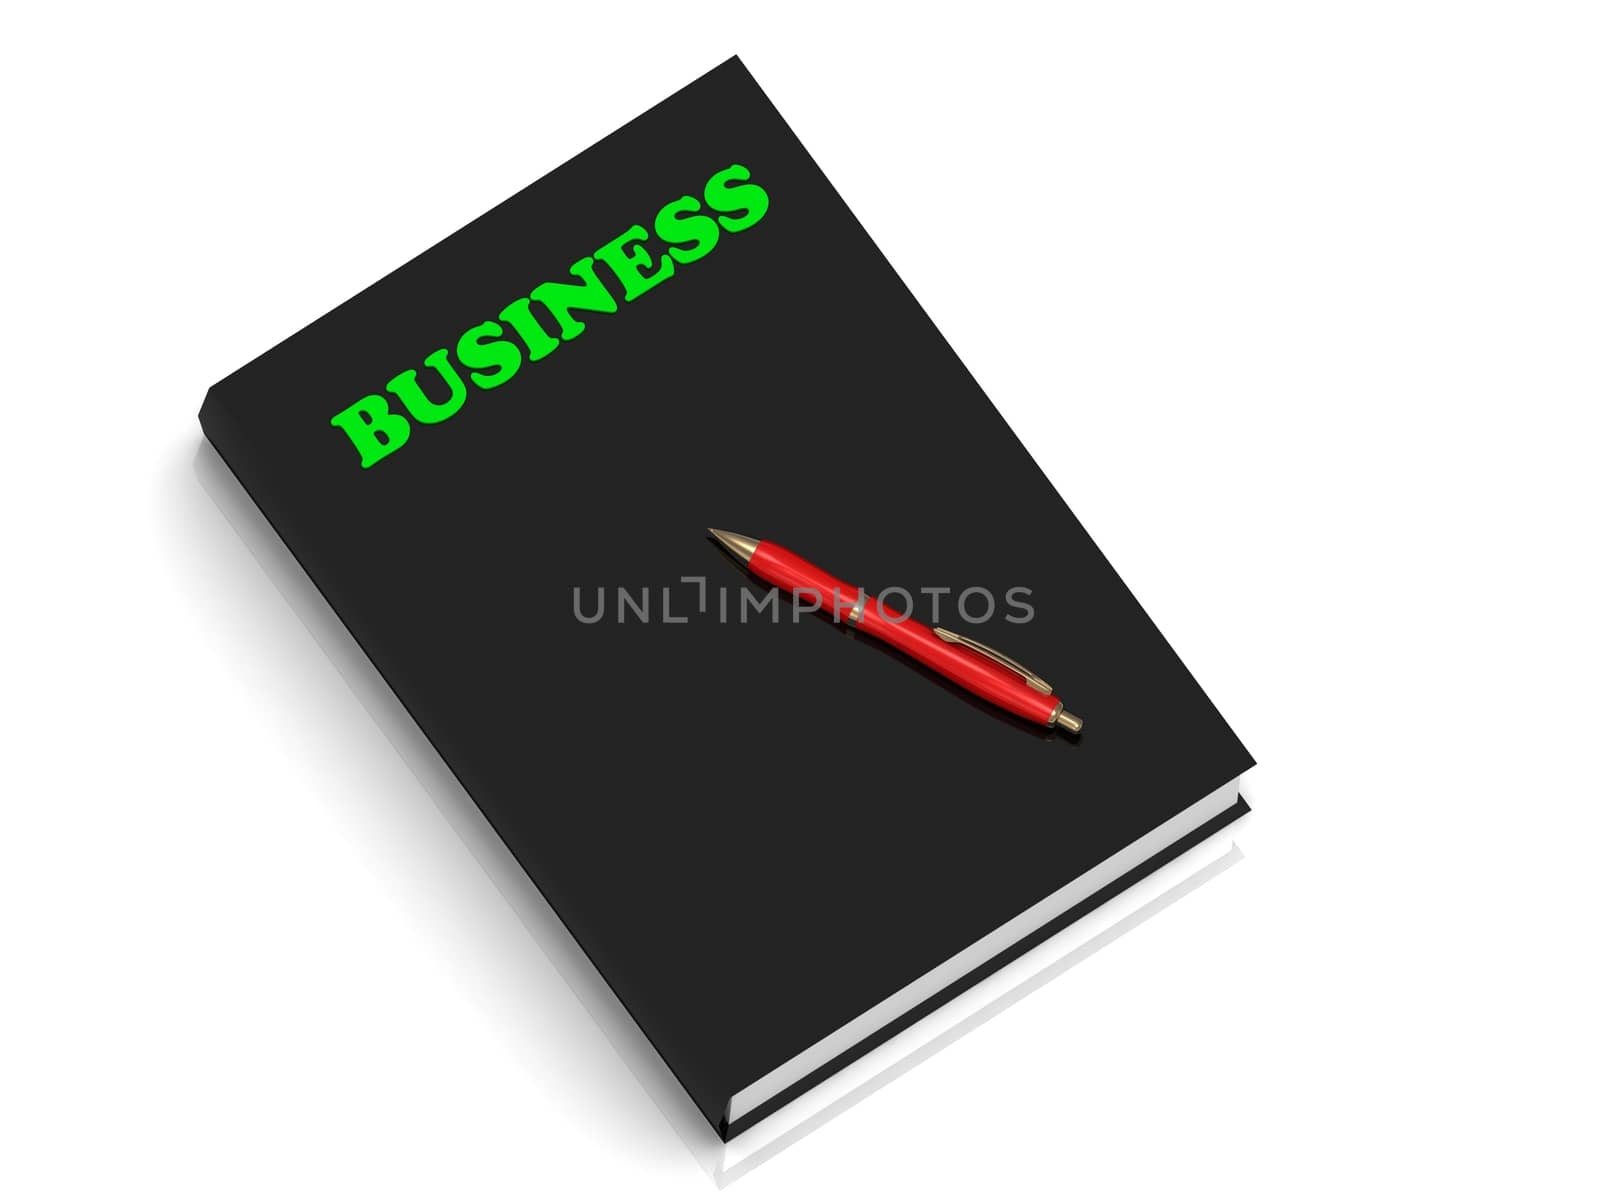 BUSINESS- inscription of green letters on black book by GreenMost